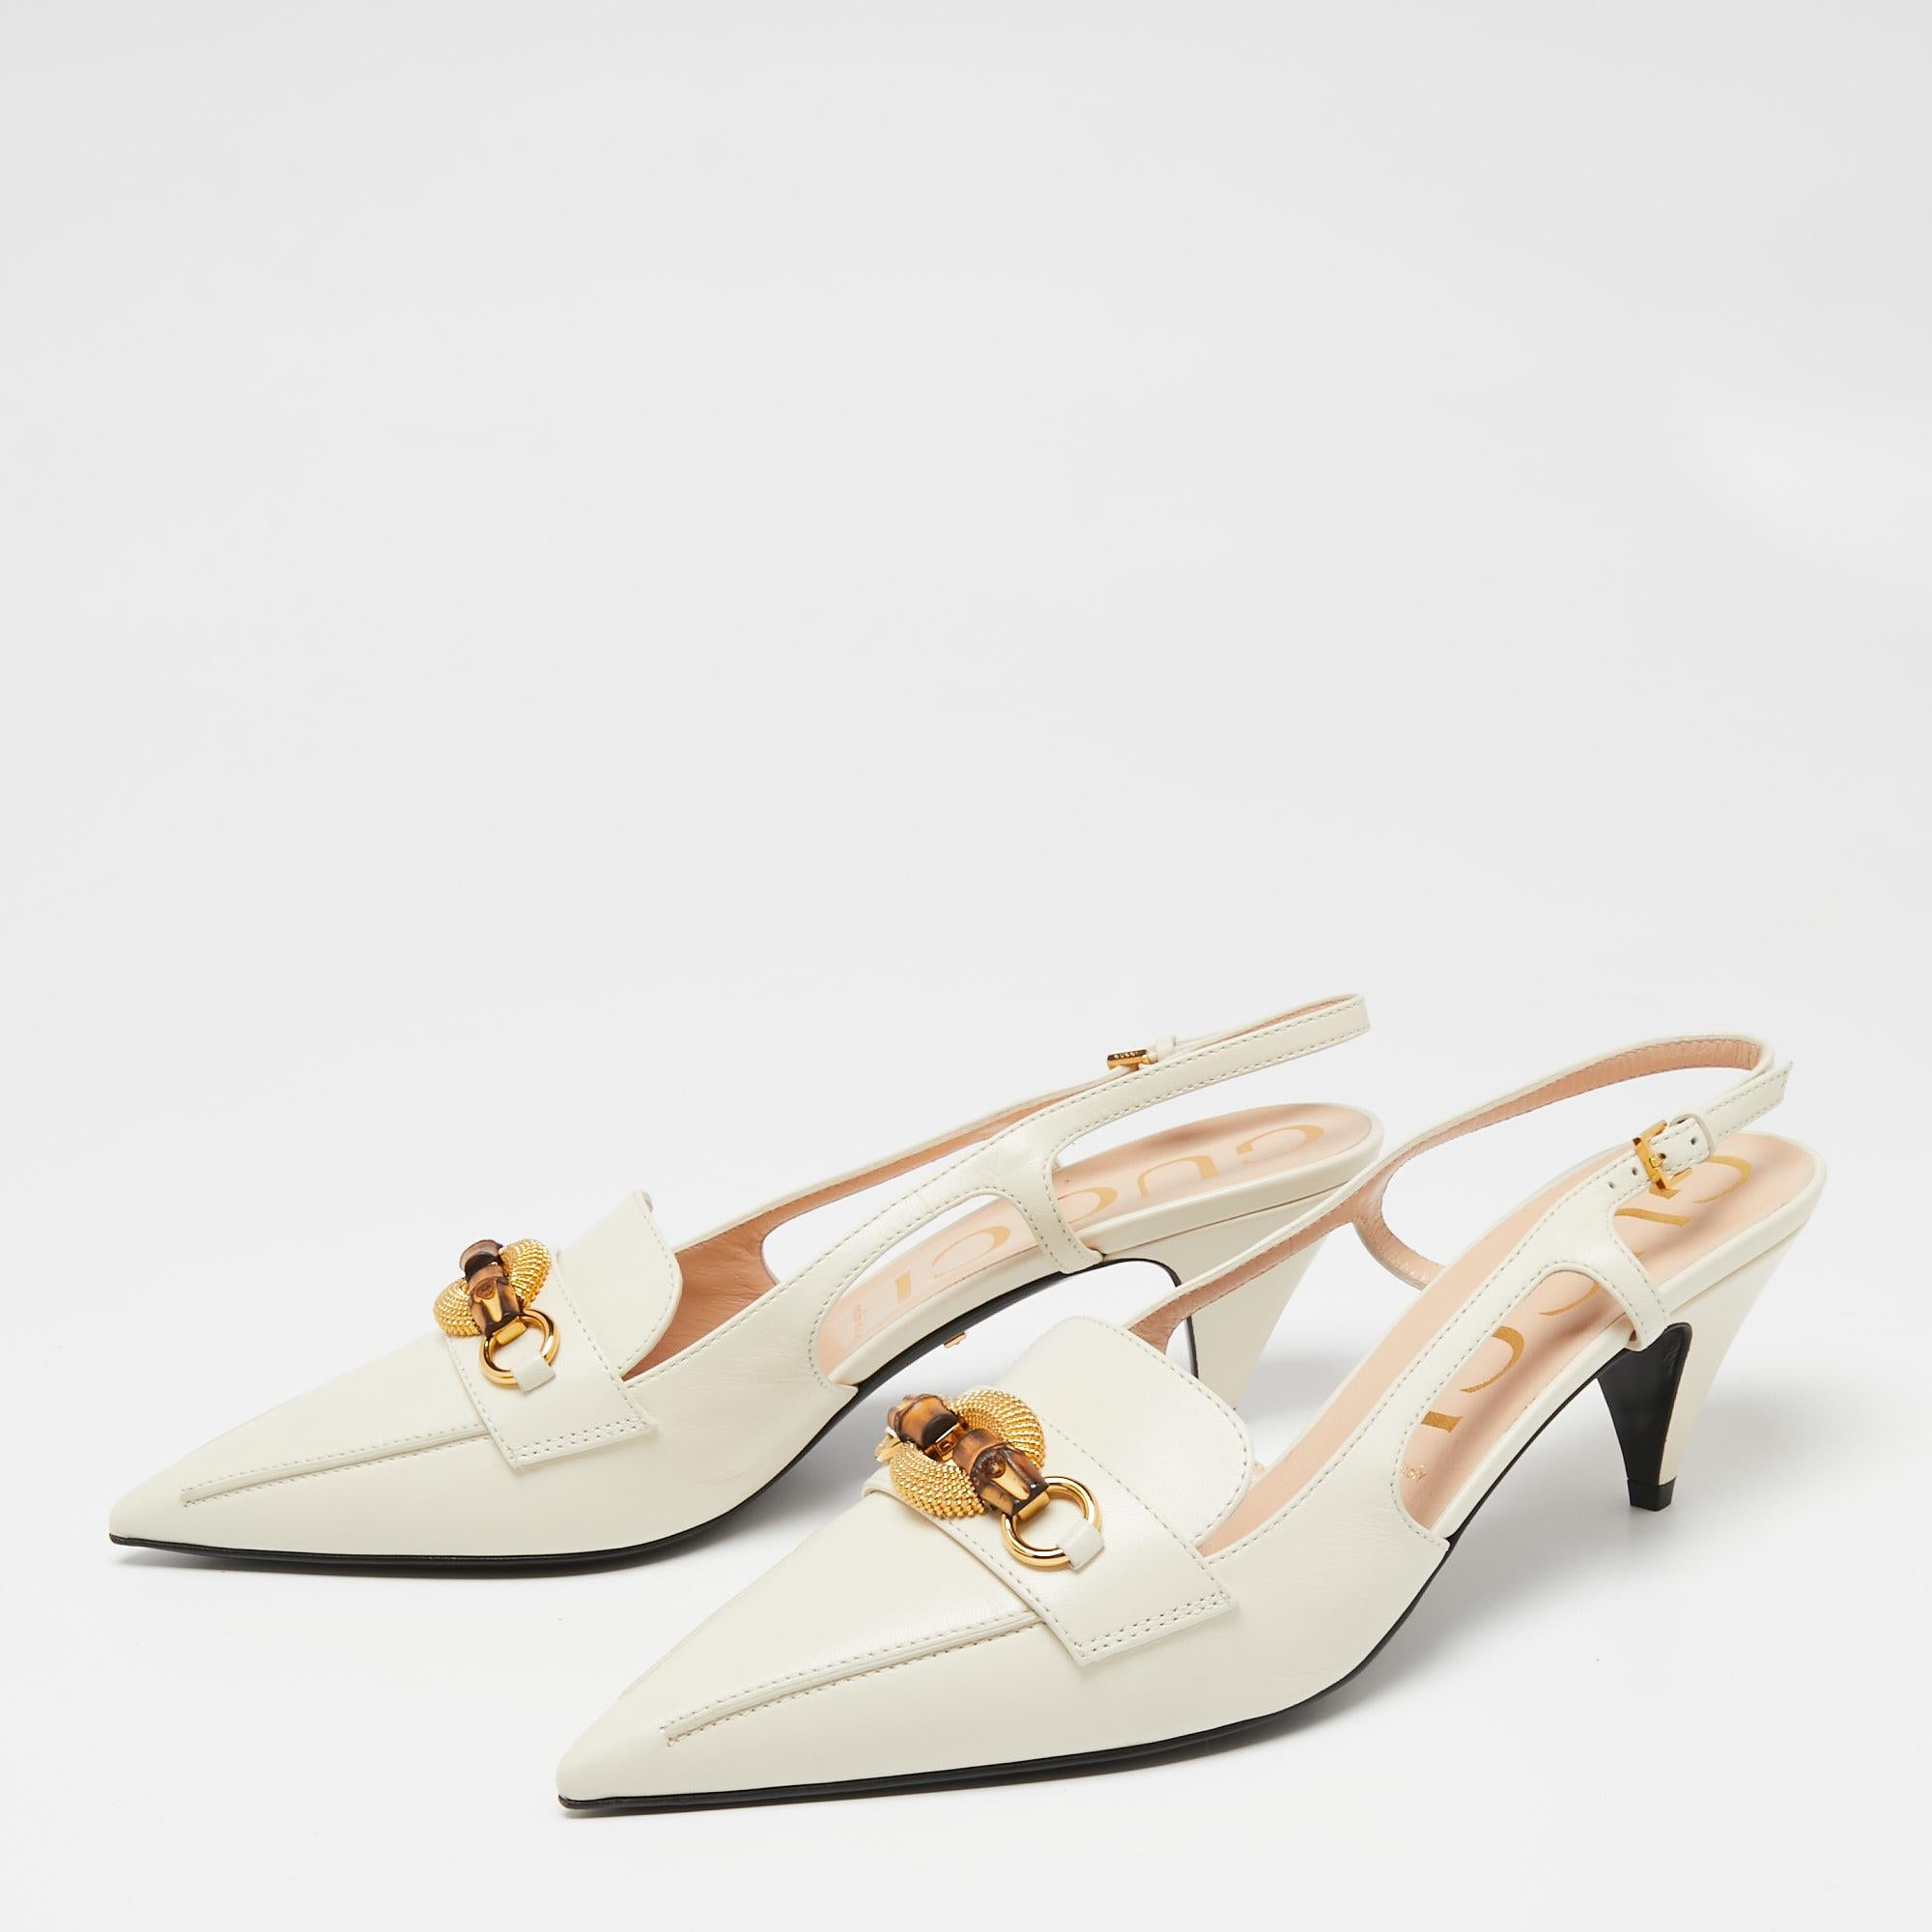 Gucci presents these beautiful mule sandals that will make you look classy and poised! They are made from leather on the exterior and feature the signature Horsebit Bamboo details near the pointed toes. They have an easy slingback style with buckled